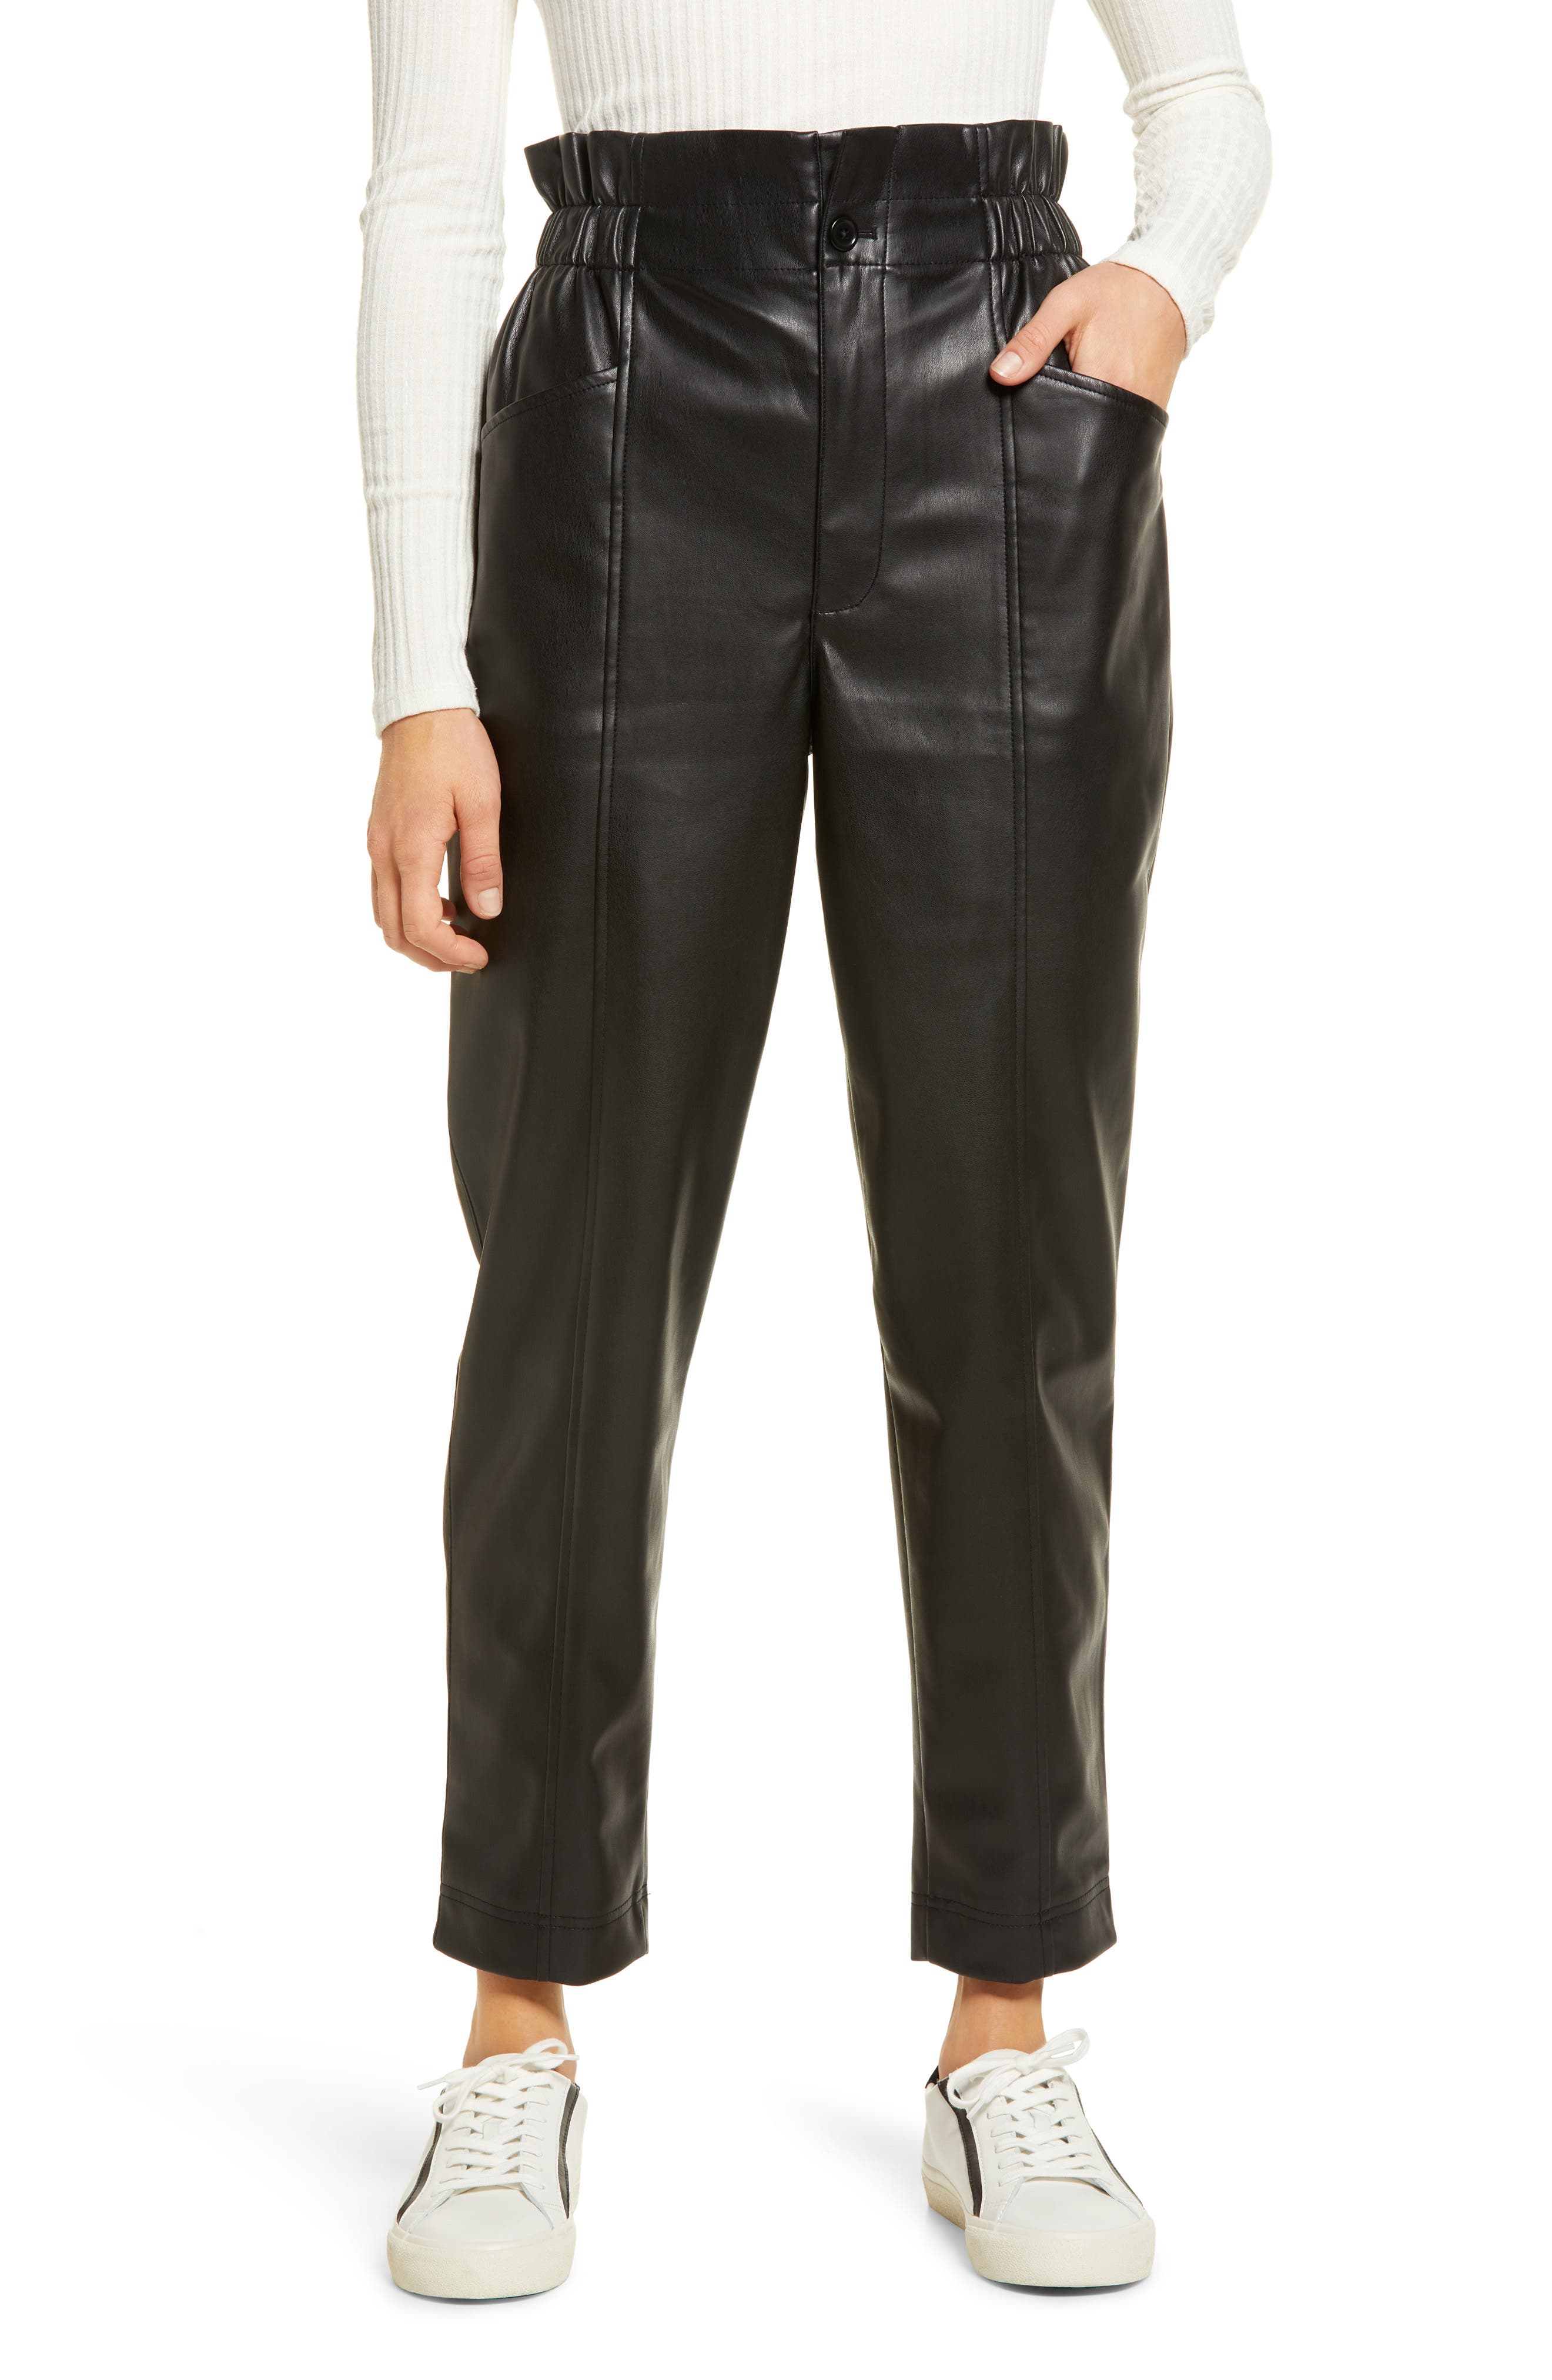 madewell pants nordstrom